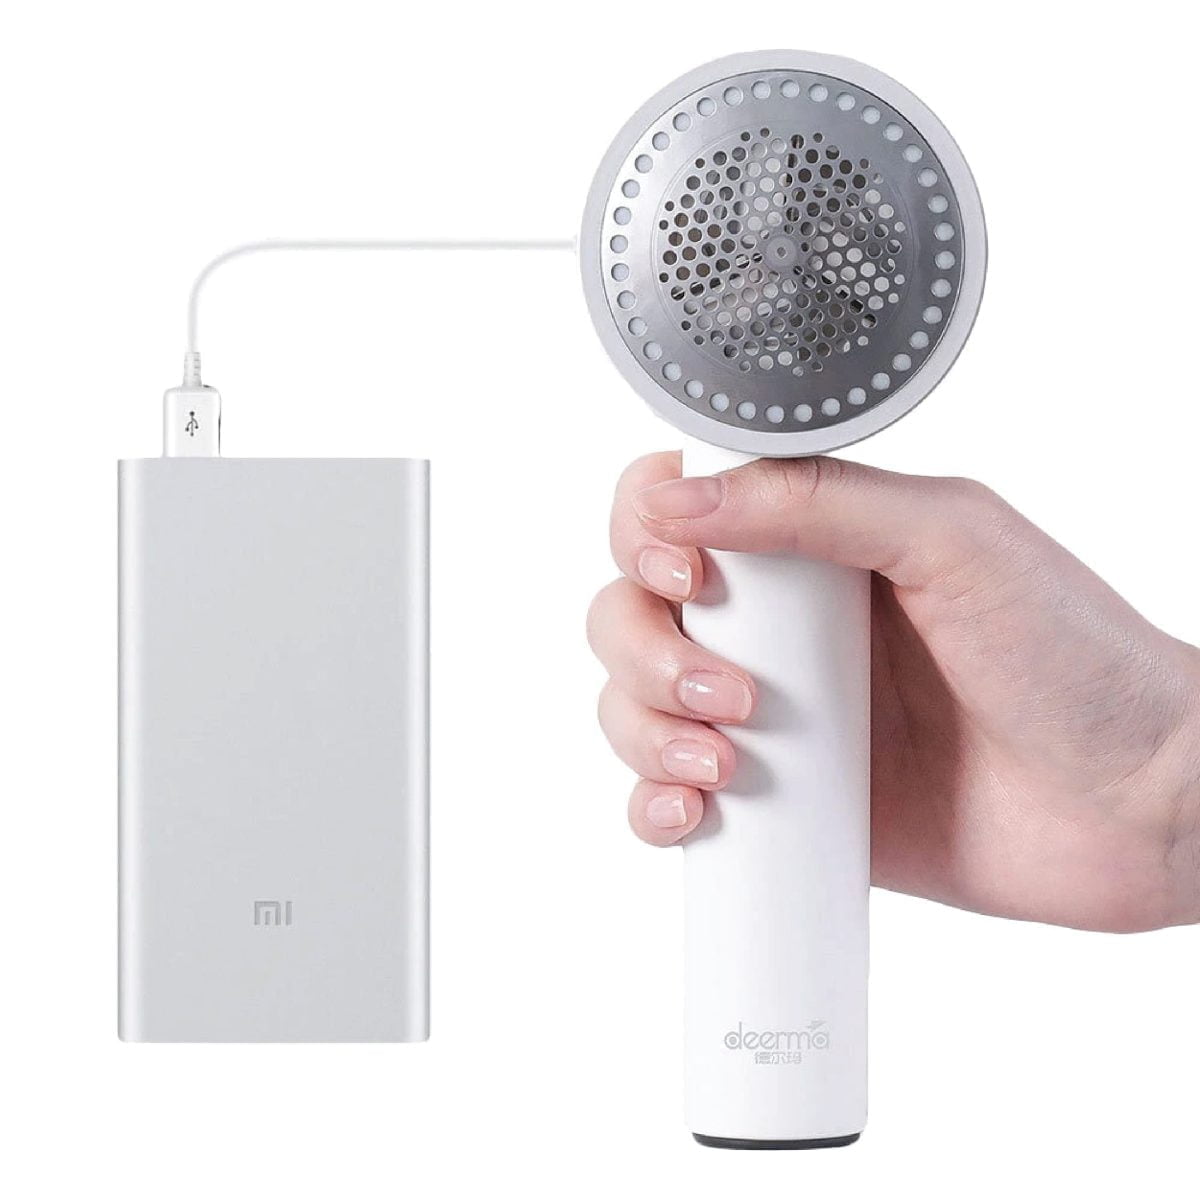 6 05 Xiaomi &Lt;Strong&Gt;Deerma Clothes Sticky Hair Multi-Function Trimmer Charge Plug-In 7000R / Min Motor Fast Removal Ball&Lt;/Strong&Gt; Concealed Multi-Purpose Sticky Hair Tube Easily Remove Dander, Clean As New. The &Lt;Strong&Gt;Sticky Hair Tube&Lt;/Strong&Gt; Is Hidden At The Handle To Maximize The Space Utilization. Pulling It Out Can Absorb The Residual Dander, Effectively Preventing The Dander And The Clothes Fiber From Winding Up Again. Easy To Operate, Make Clothes New And Fashion Https://Youtu.be/Cbkpzs7Ufpa Xiaomi Deerma Portable Lint Remover Multi-Function Usb Charging